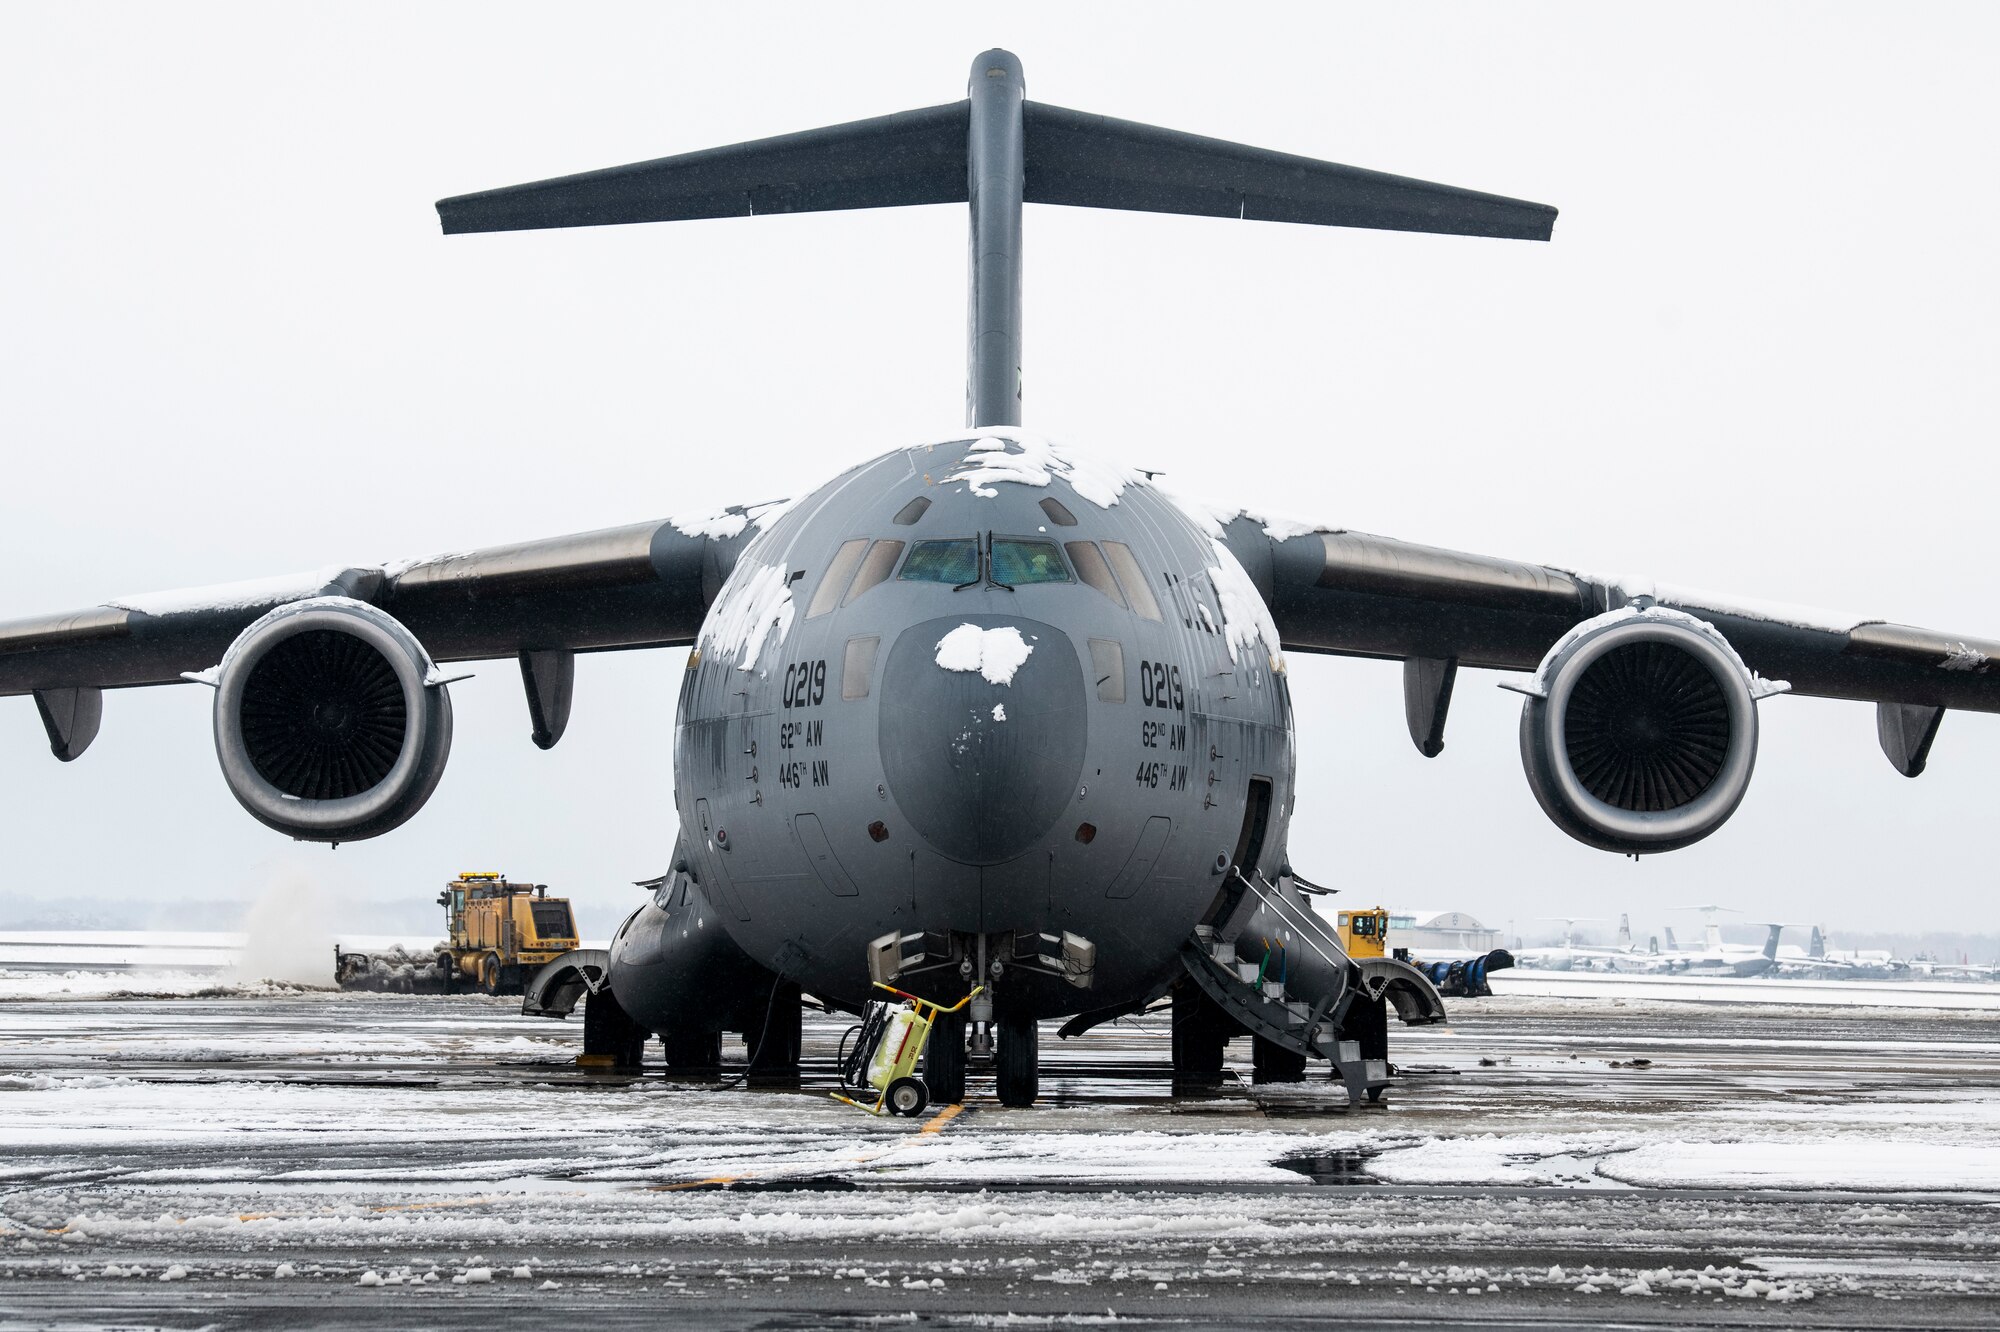 A snow-covered C-17 Globemaster III, assigned to the 62nd Airlift Wing, Joint Base Lewis-McChord, Washington, sits on the flight line at Dover Air Force Base, Delaware, Feb. 11, 2021. As snow fell, the base continued normal operations and prepared for additional snowfall. (U.S. Air Force photo by Senior Airman Christopher Quail)